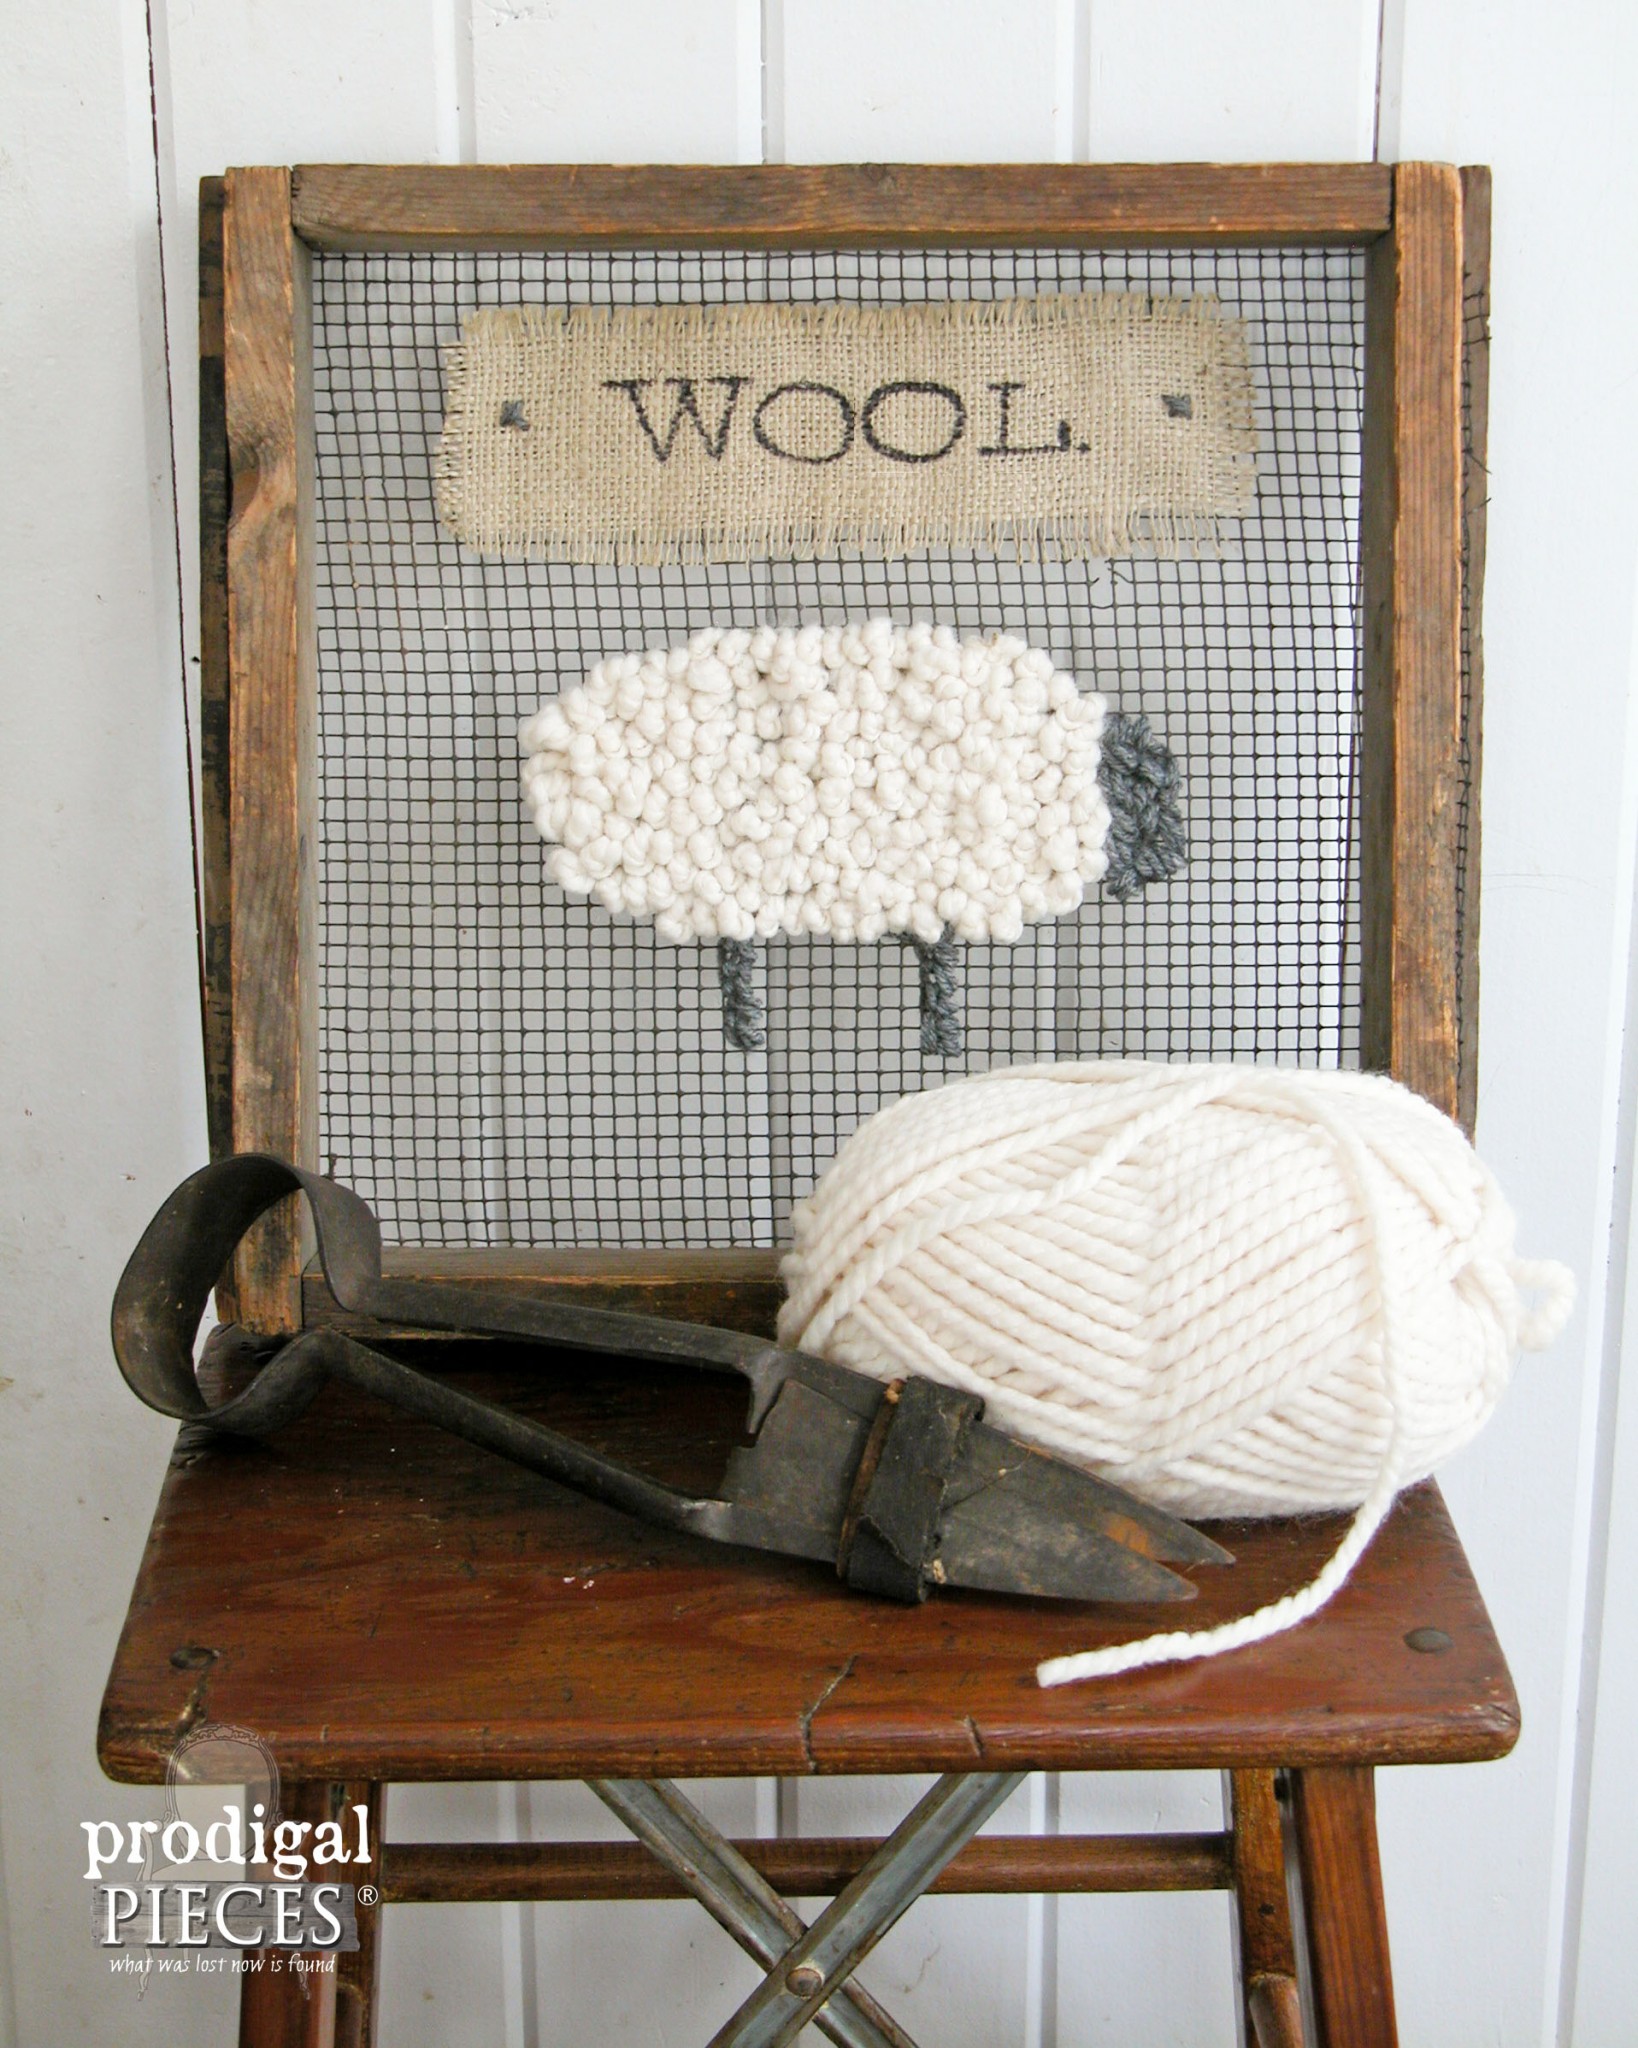 Repurposed Farmhouse Sifter Turned Wooly Sign by Prodigal Pieces | prodigalpieces.com